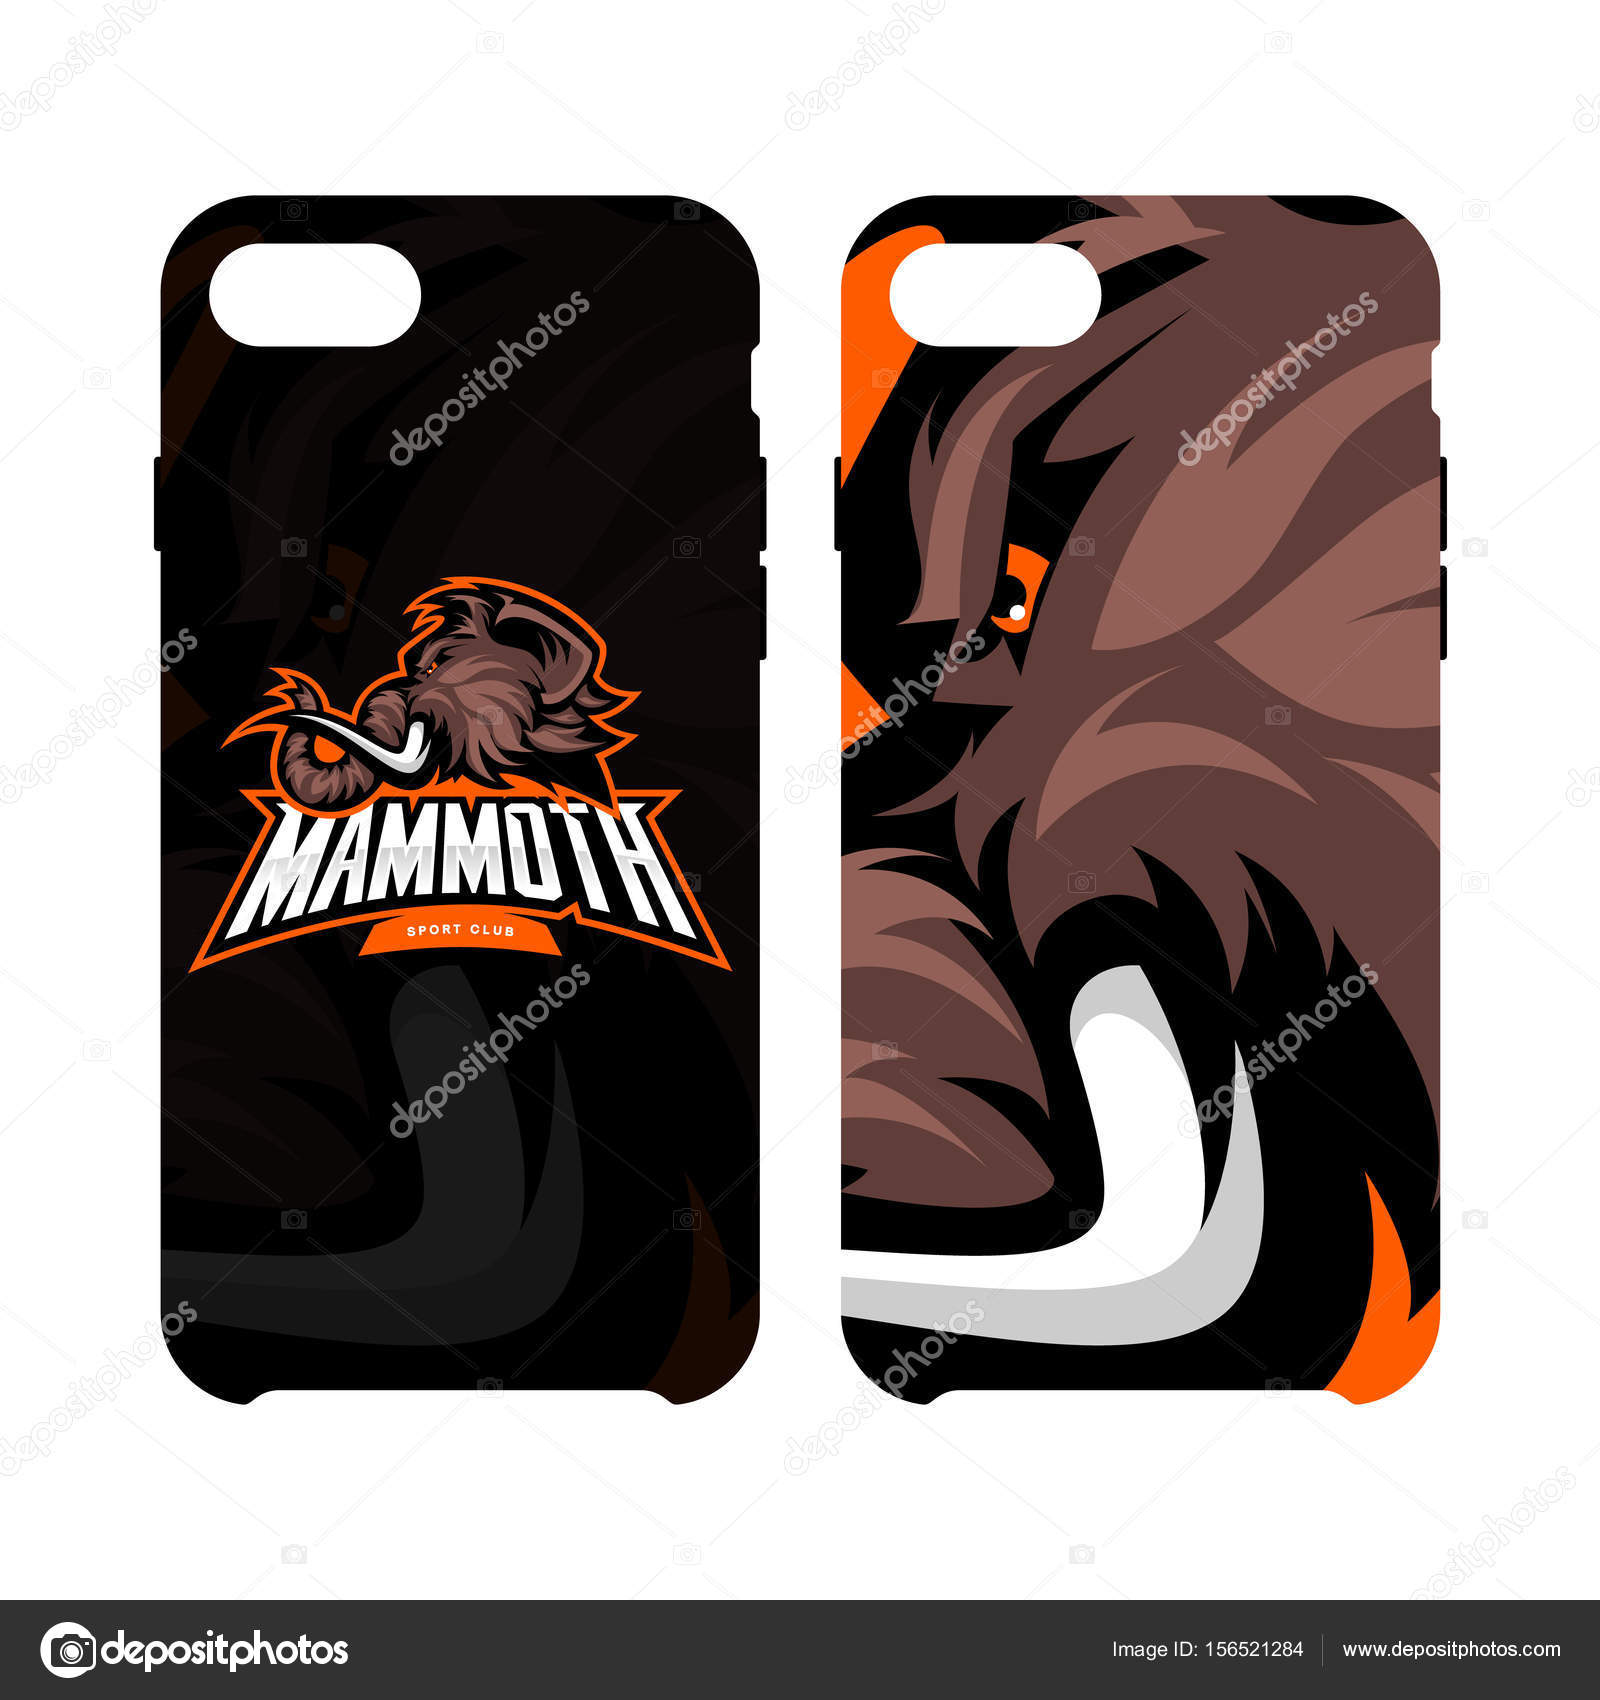 587 Woolly Mammoth Vector Images Woolly Mammoth Illustrations Depositphotos